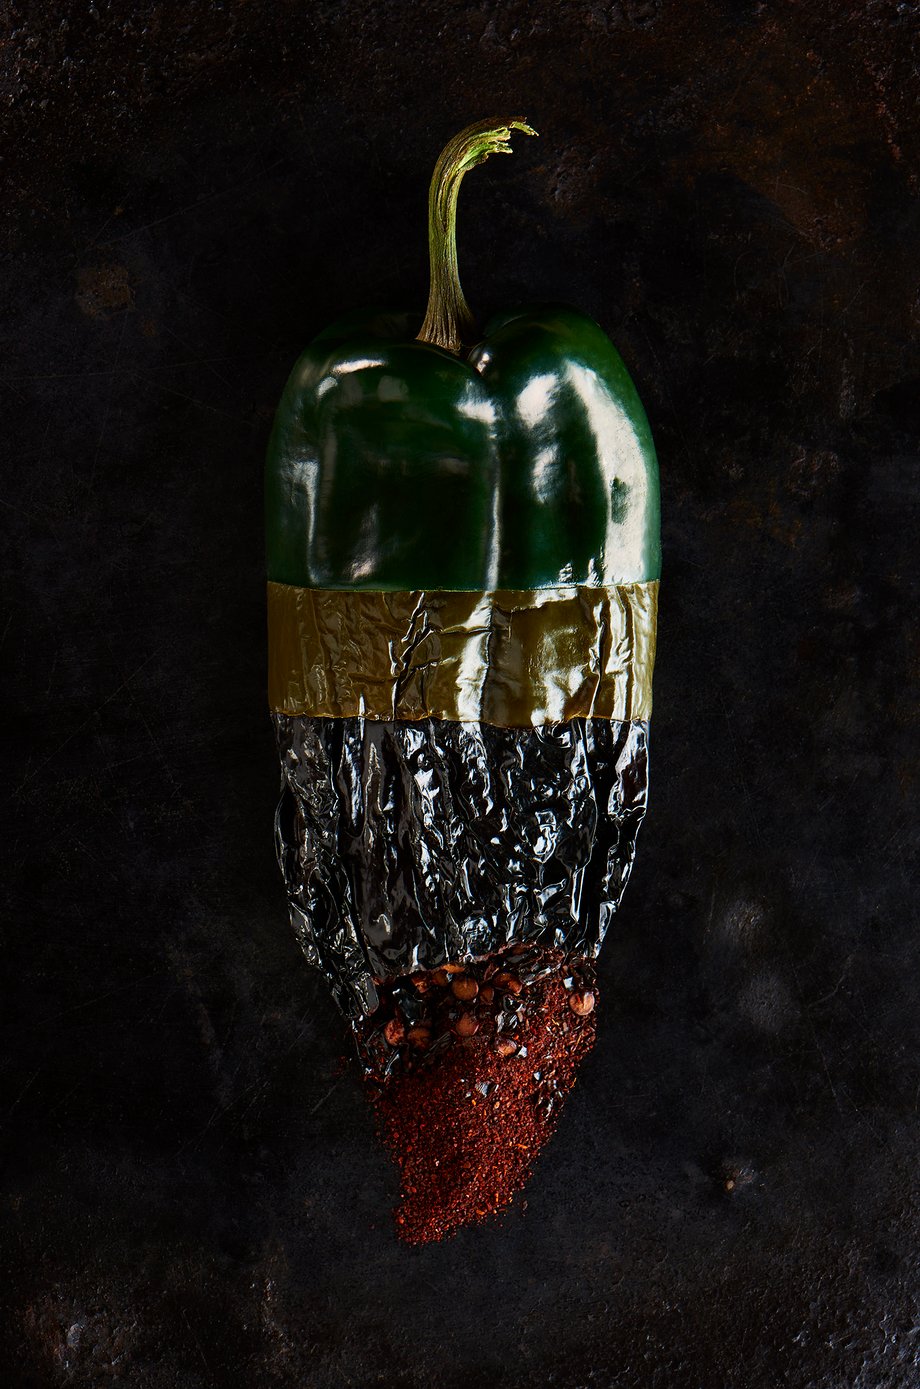 Justin Paris snaps a photo of a hot pepper that looks fresh at the top and takes on different colors and textures  as though roasted